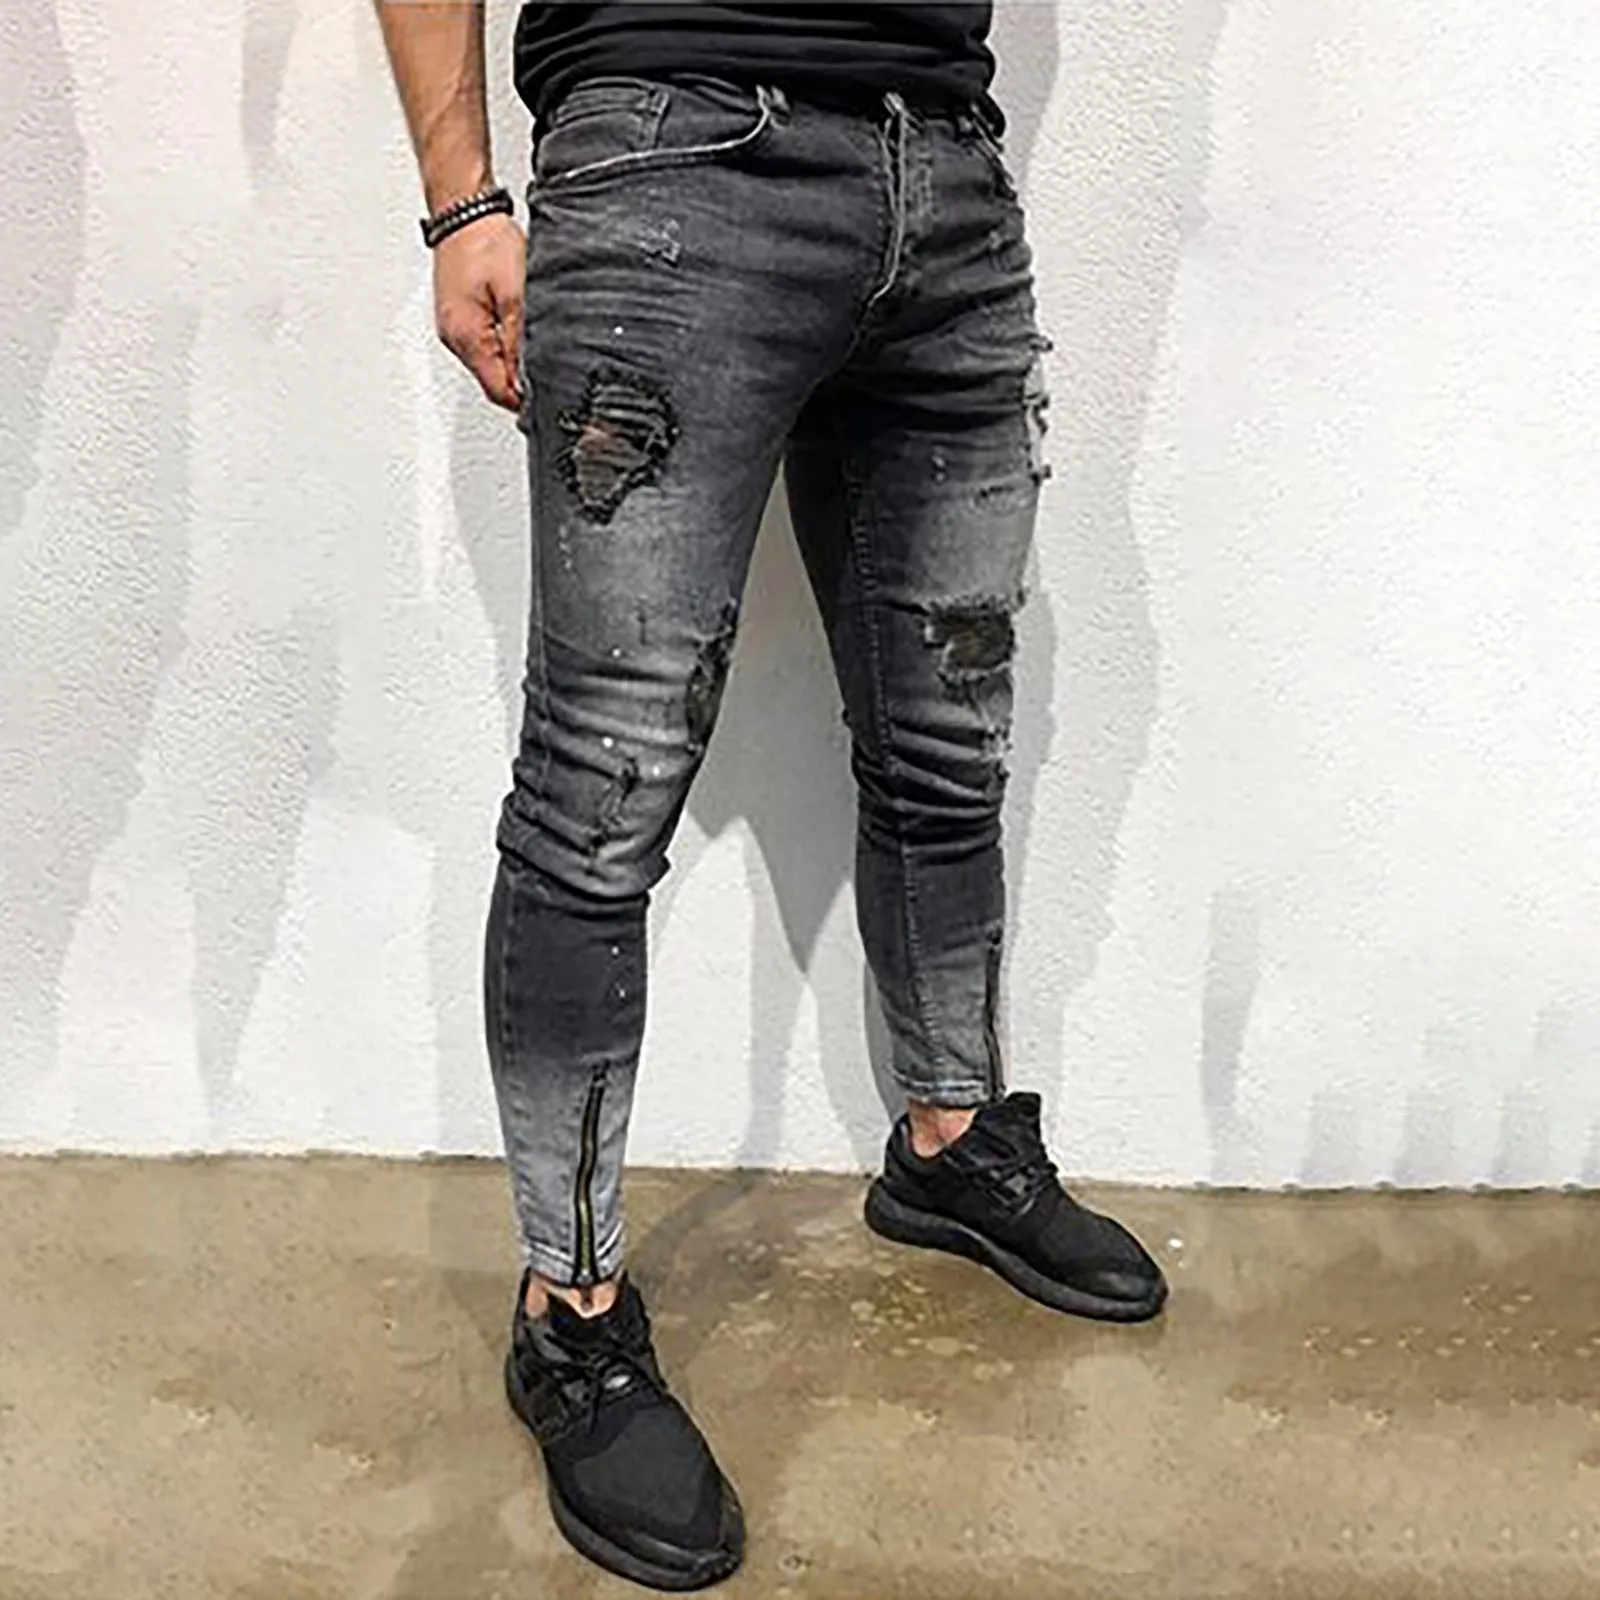 

Street Styles Men Stretchy Ripped Skinny Biker Trouser Embroidery Print Jeans Destroyed Hole Taped Slim Fit Denim Scratched Jean